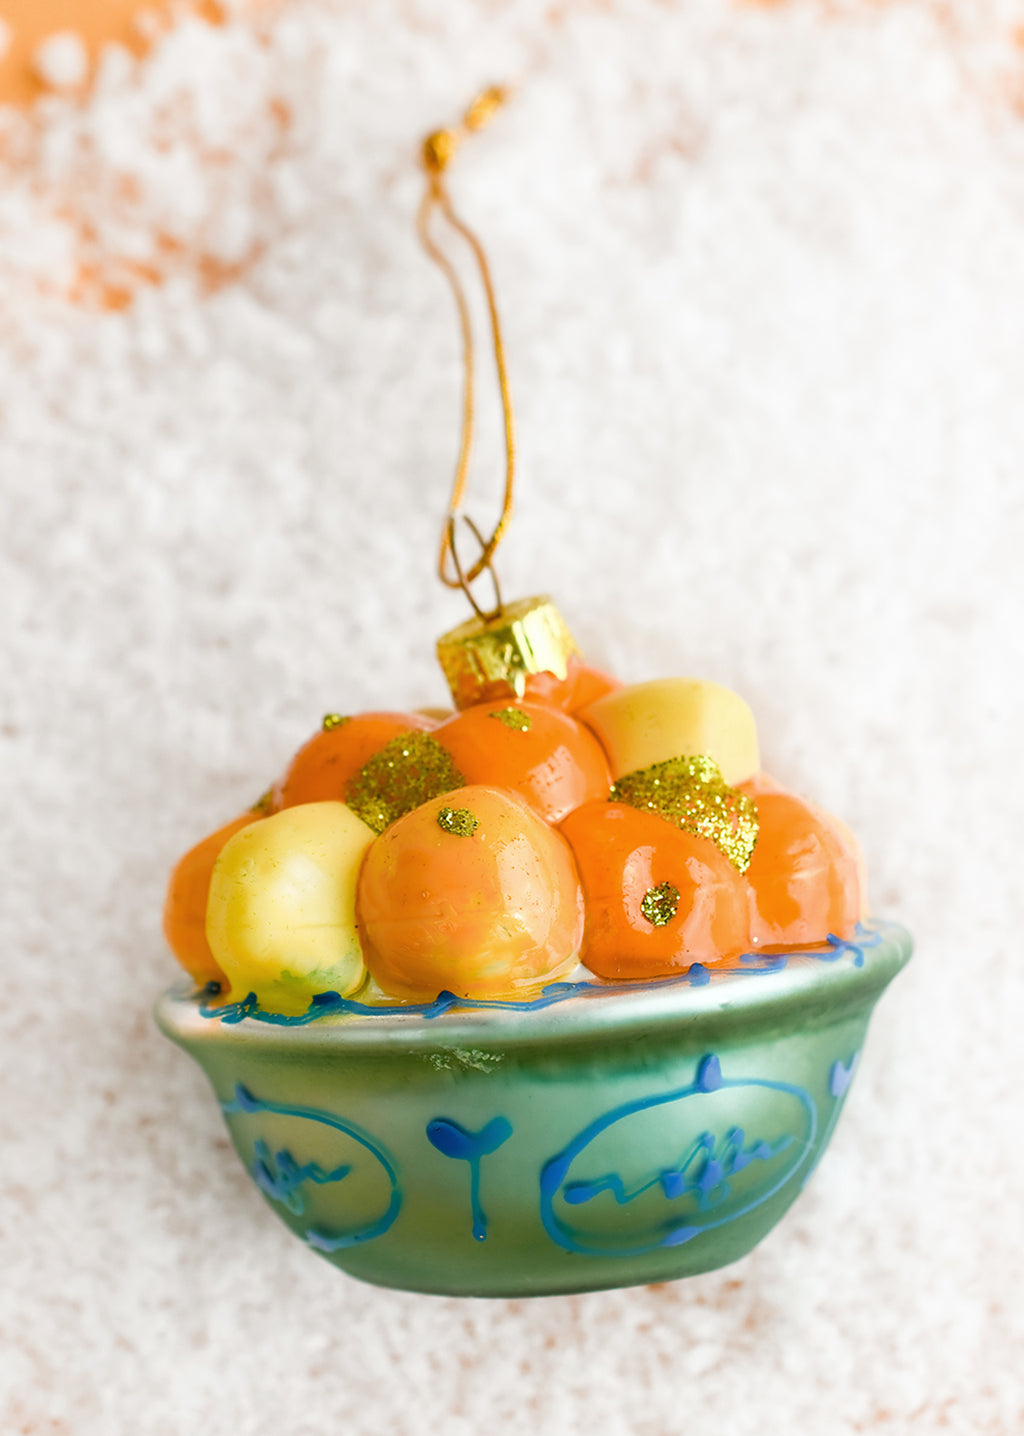 2: A glass ornament depicting a bowl of lemons and oranges.